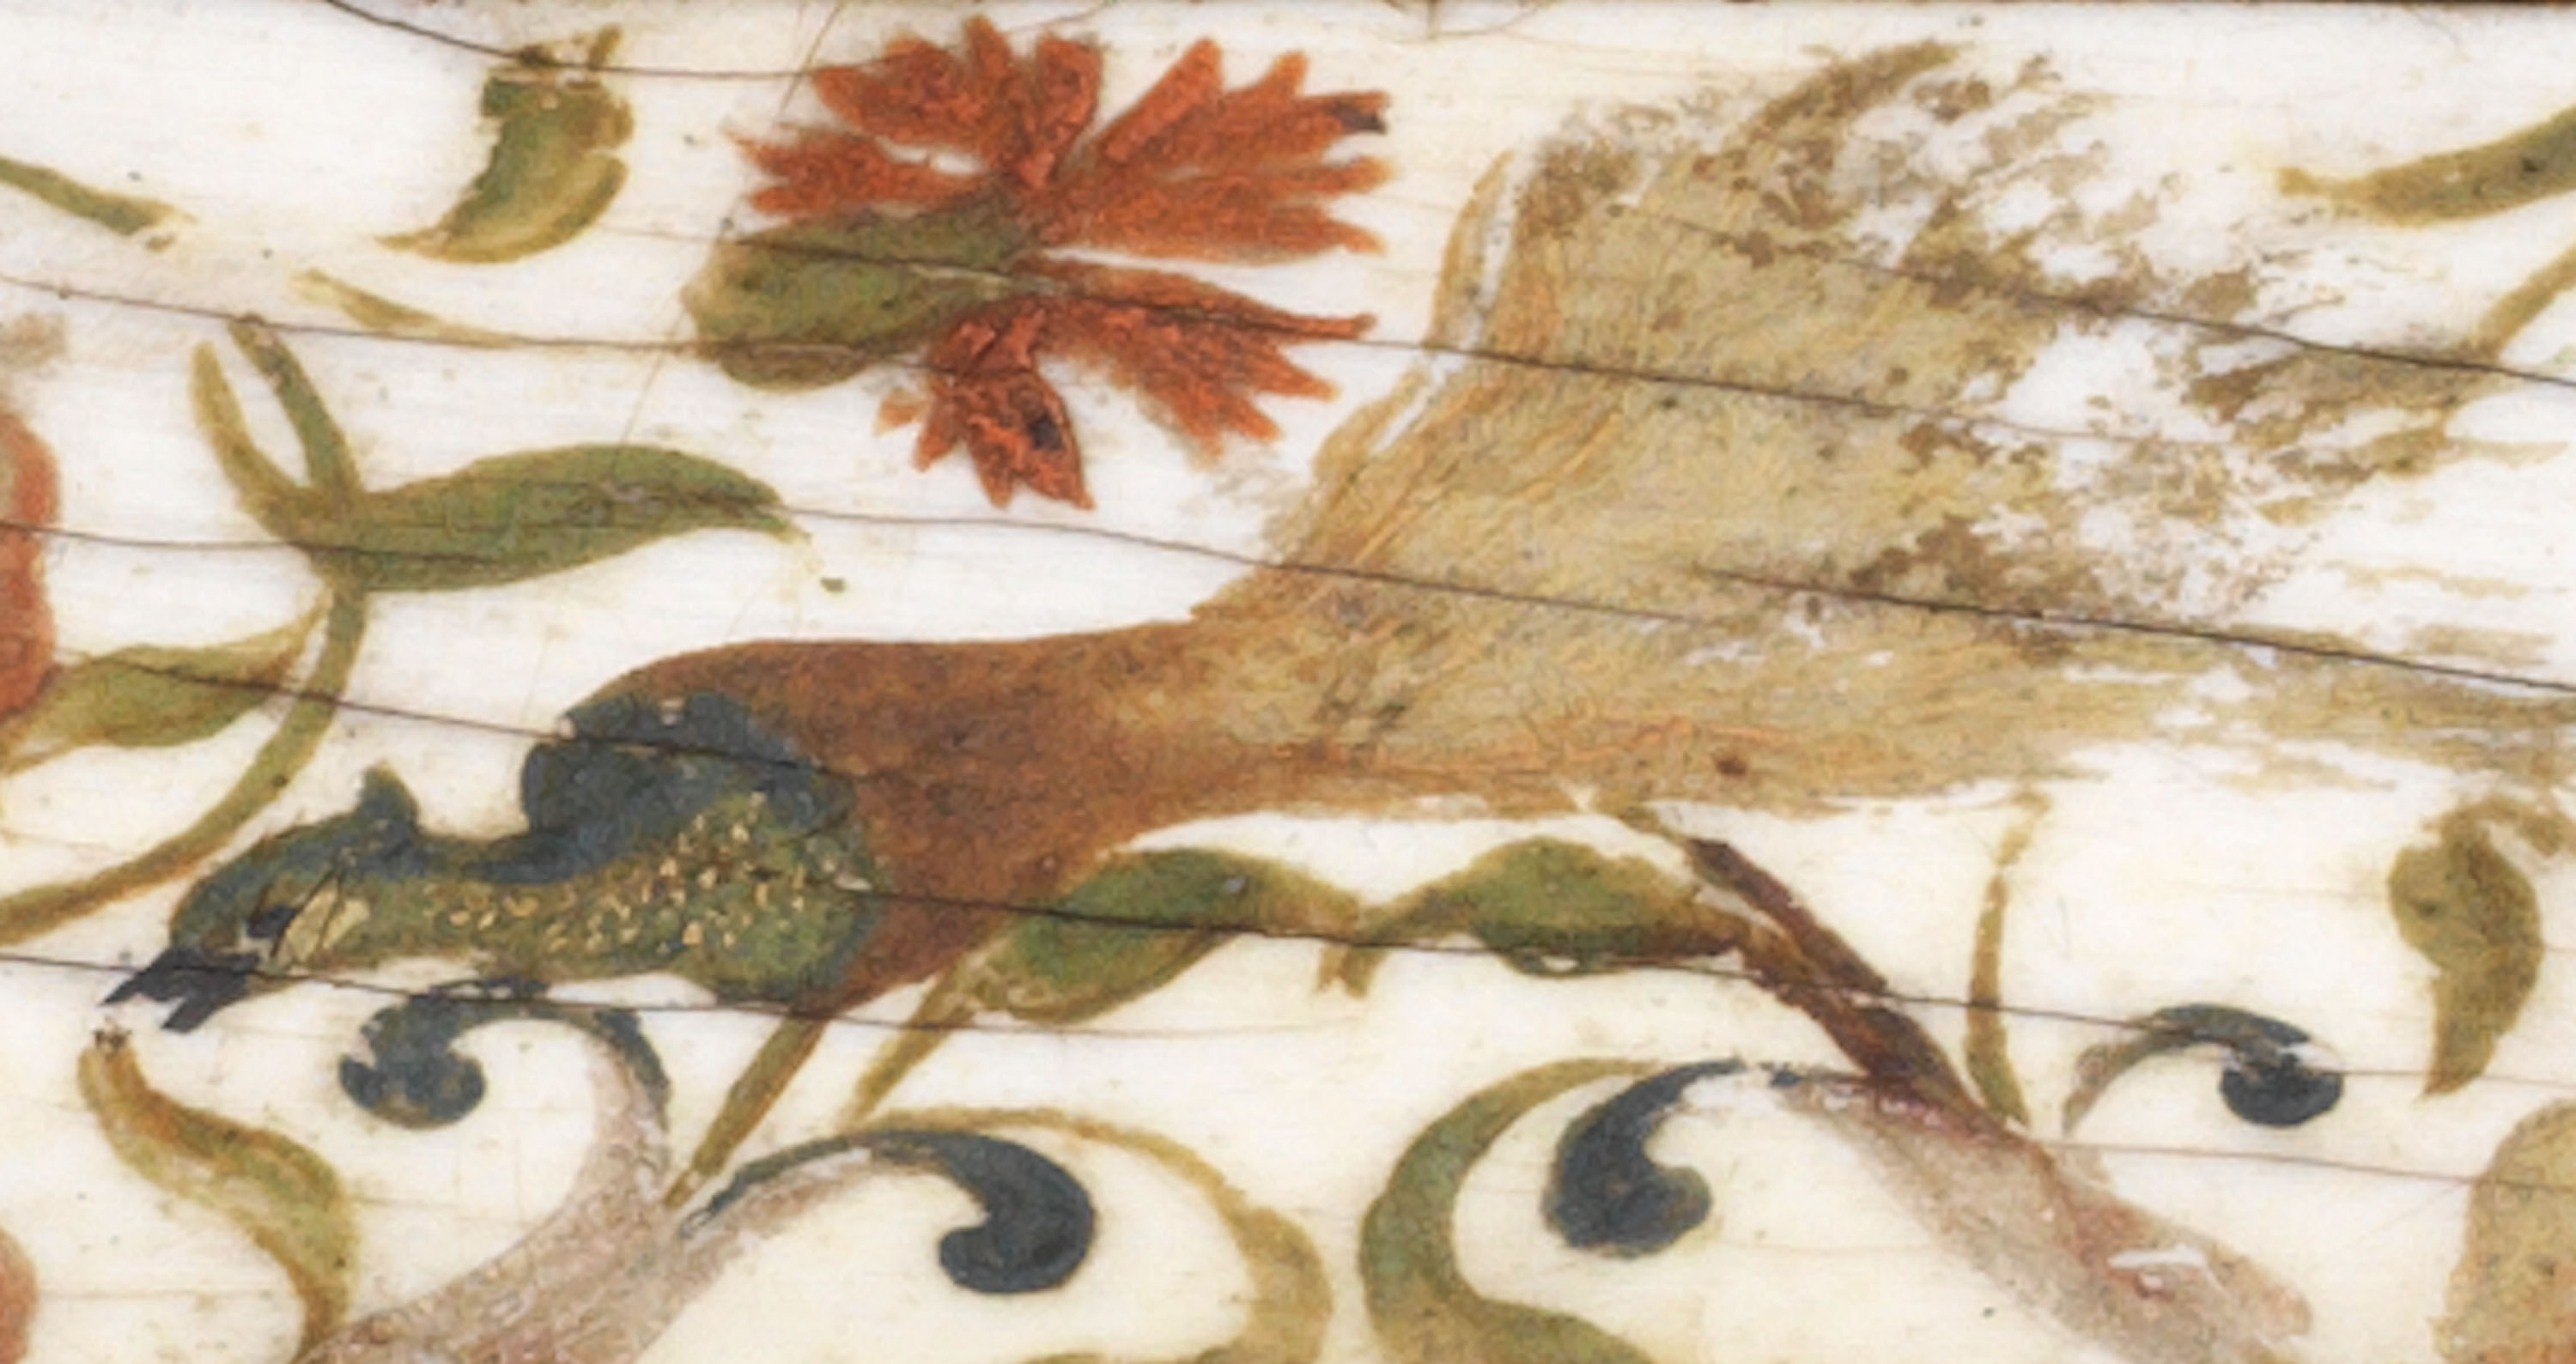 The bird of paradise painted on this box appears to be floating, without wings of legs. © The Samuel Courtauld Trust, The Courtauld Gallery, London.